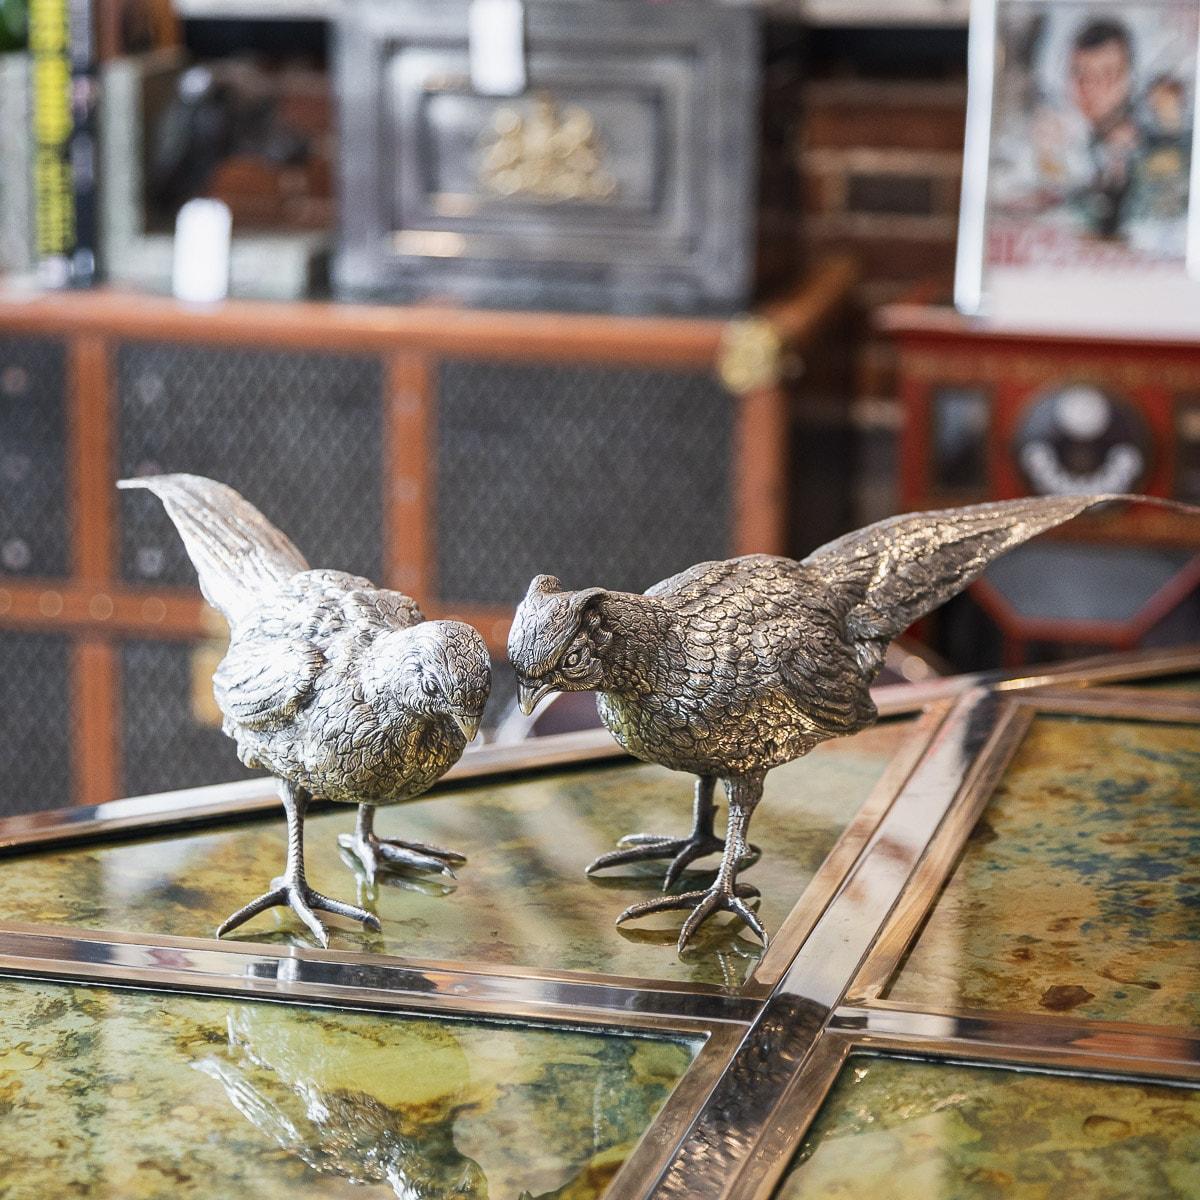 Antique early 20th century German pair of solid silver table ornaments modelled as a male and female pheasants, each statue is naturalistic and well-refined, perfect to adorn a table or fireplace during the festive season. Hallmarked German Silver